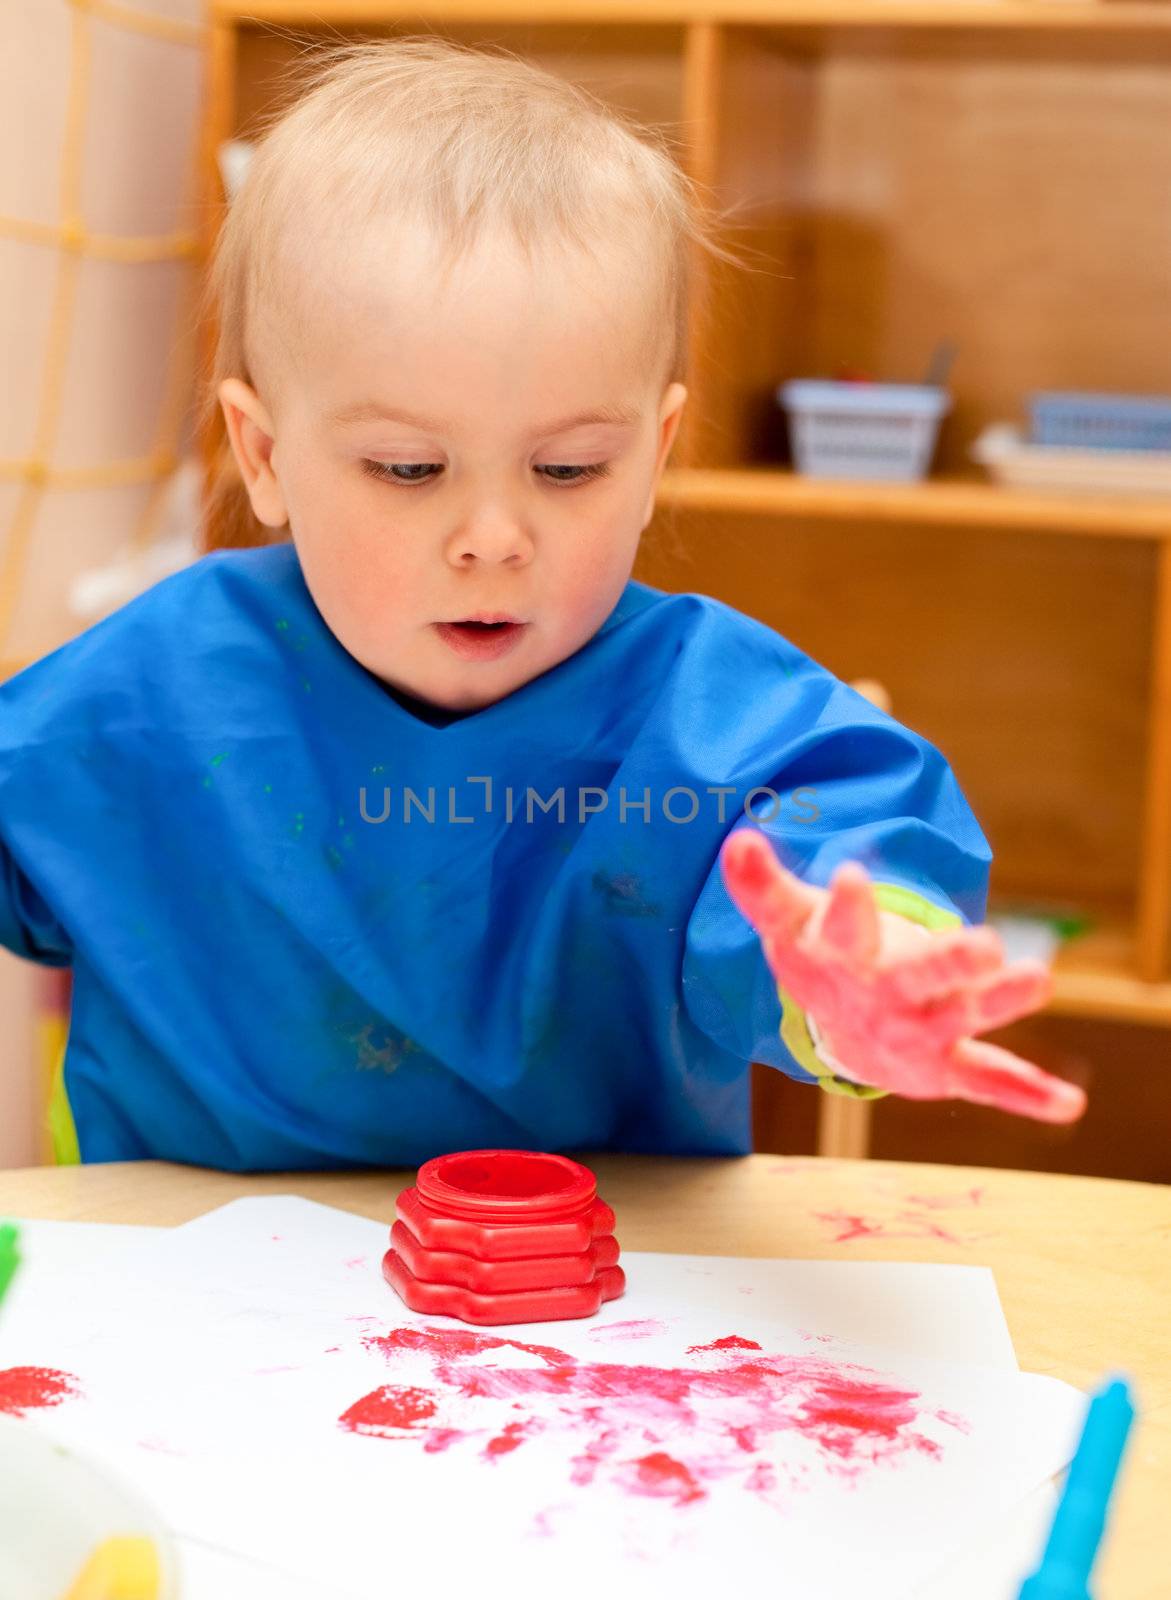 Child painting with hand by naumoid